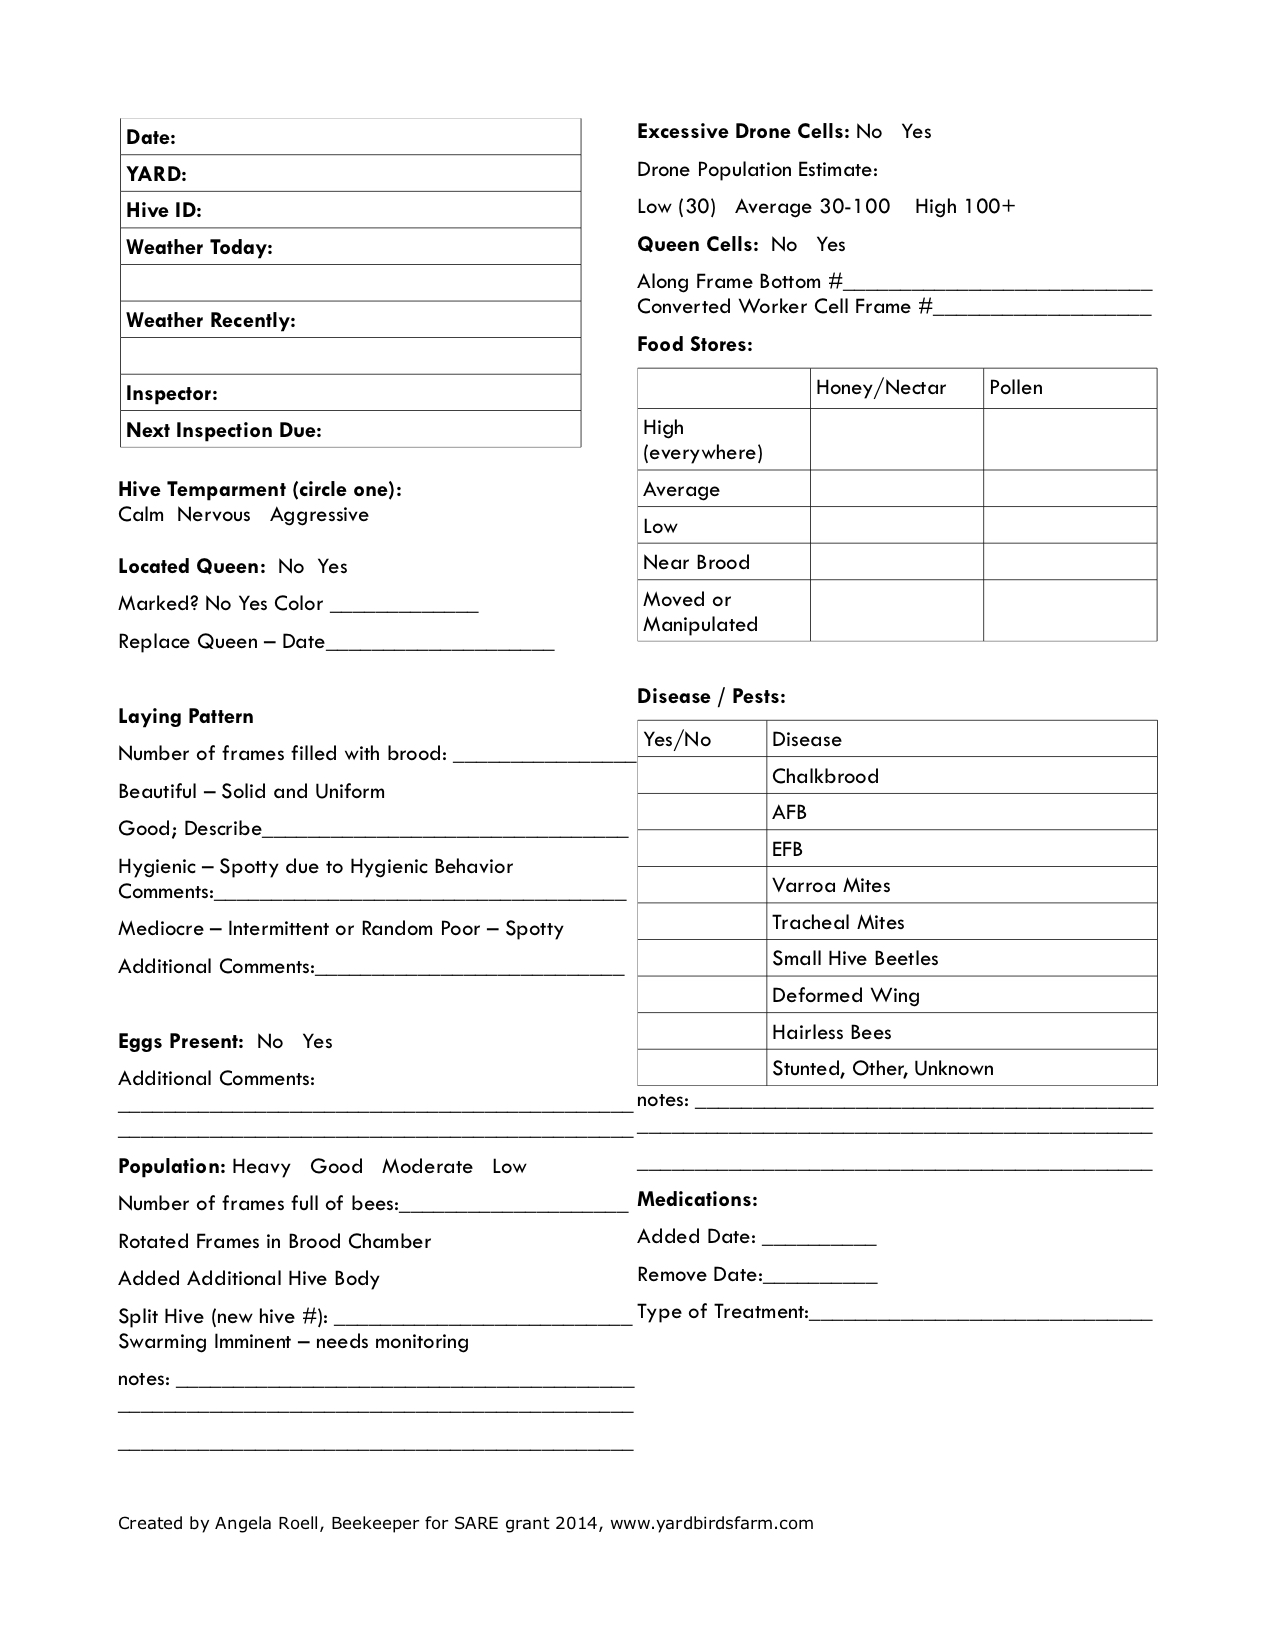 Page 1 of hive inspection sheet includes several fields to complete including date, hive ID, weather, hive temperament, laying pattern, eggs present, population, drone cells, food stores, disease/pests, and medications.